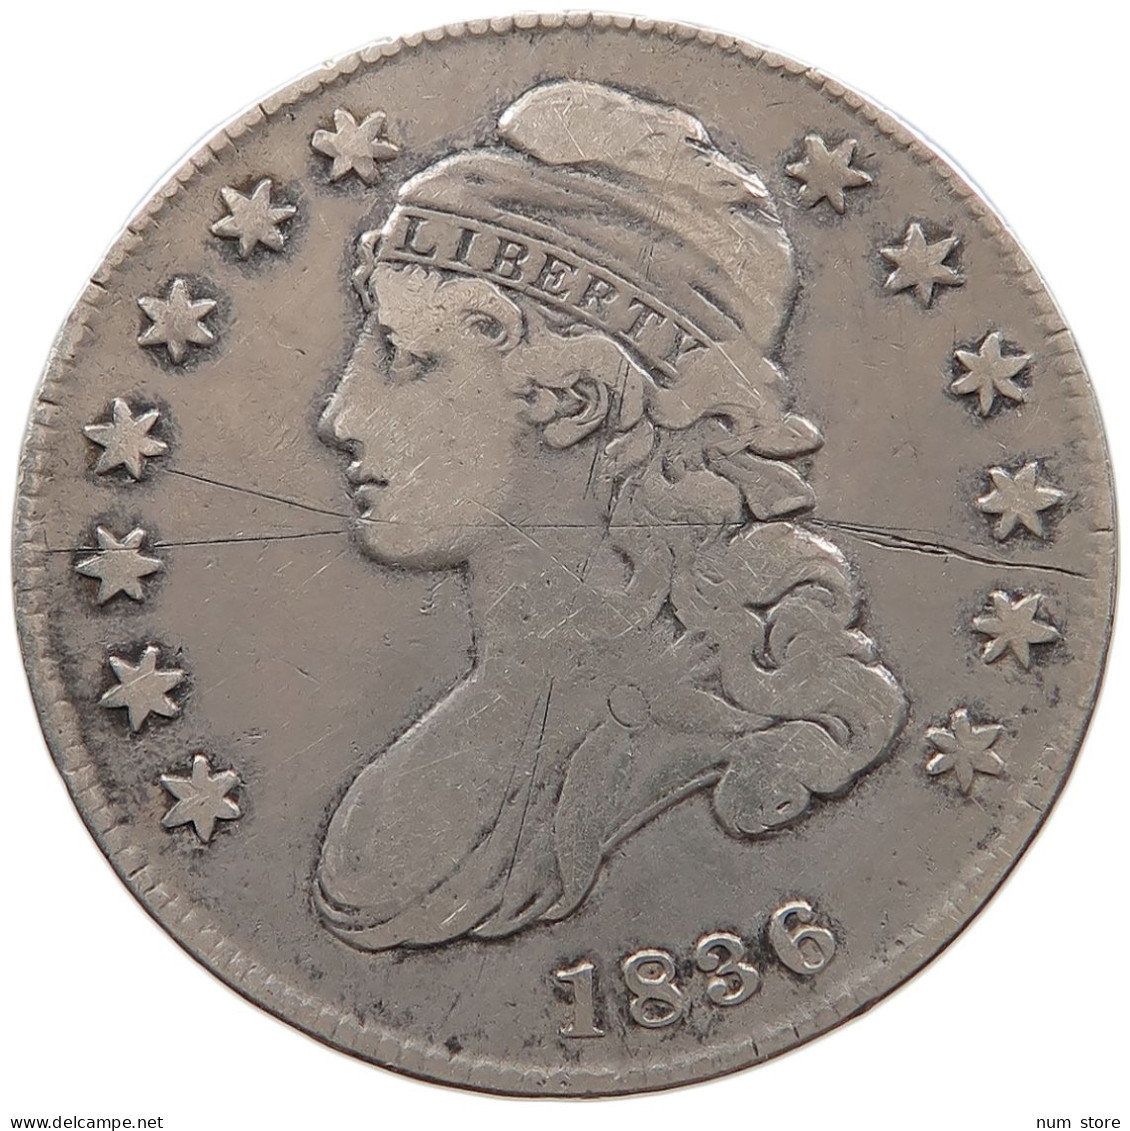 UNITED STATES OF AMERICA HALF DOLLAR 1836 CAPPED BUST #t141 0419 - 1794-1839: Early Halves